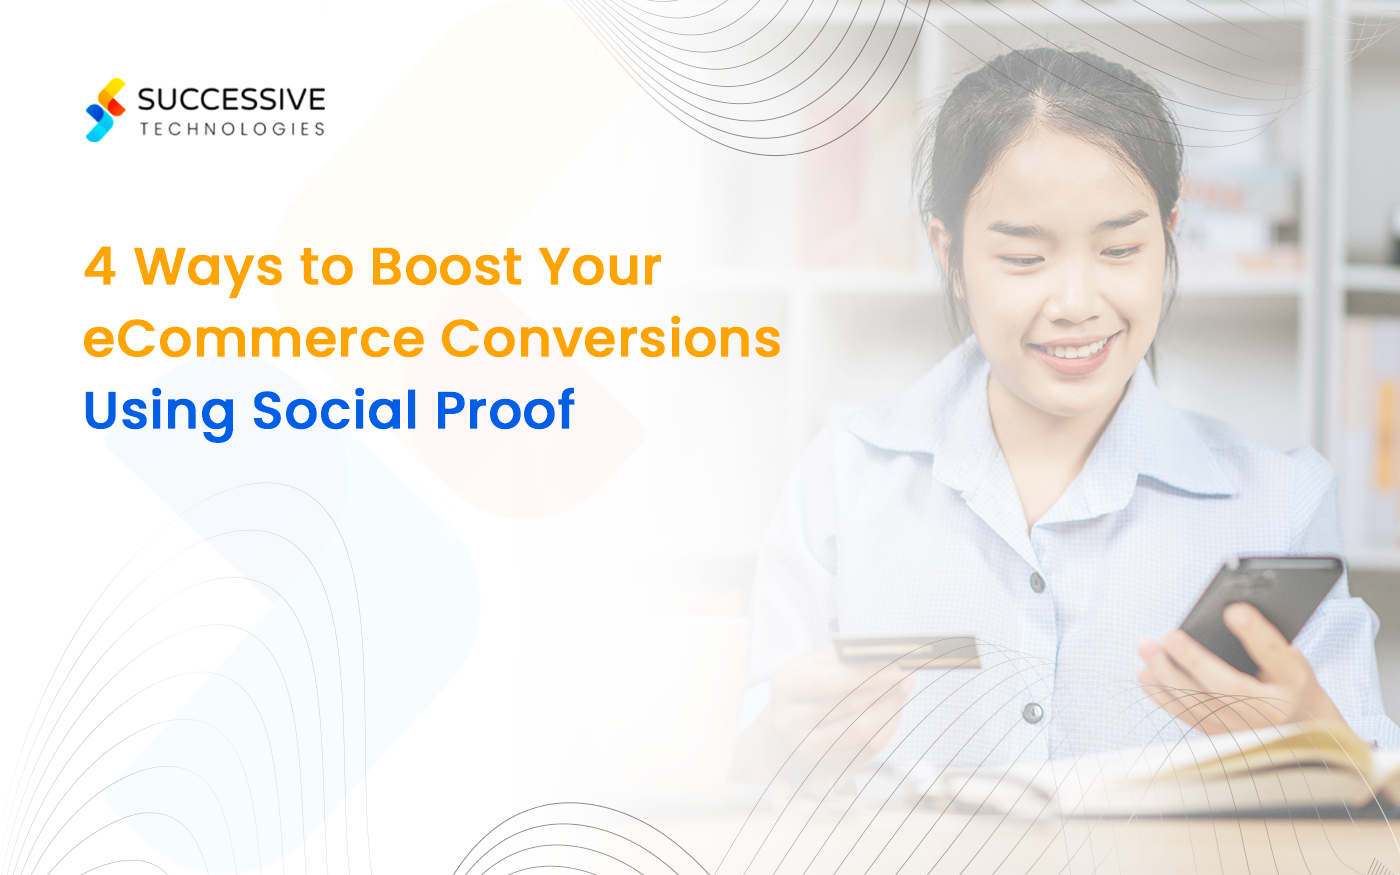 4 Ways to Boost Your eCommerce Conversions Using Social Proof